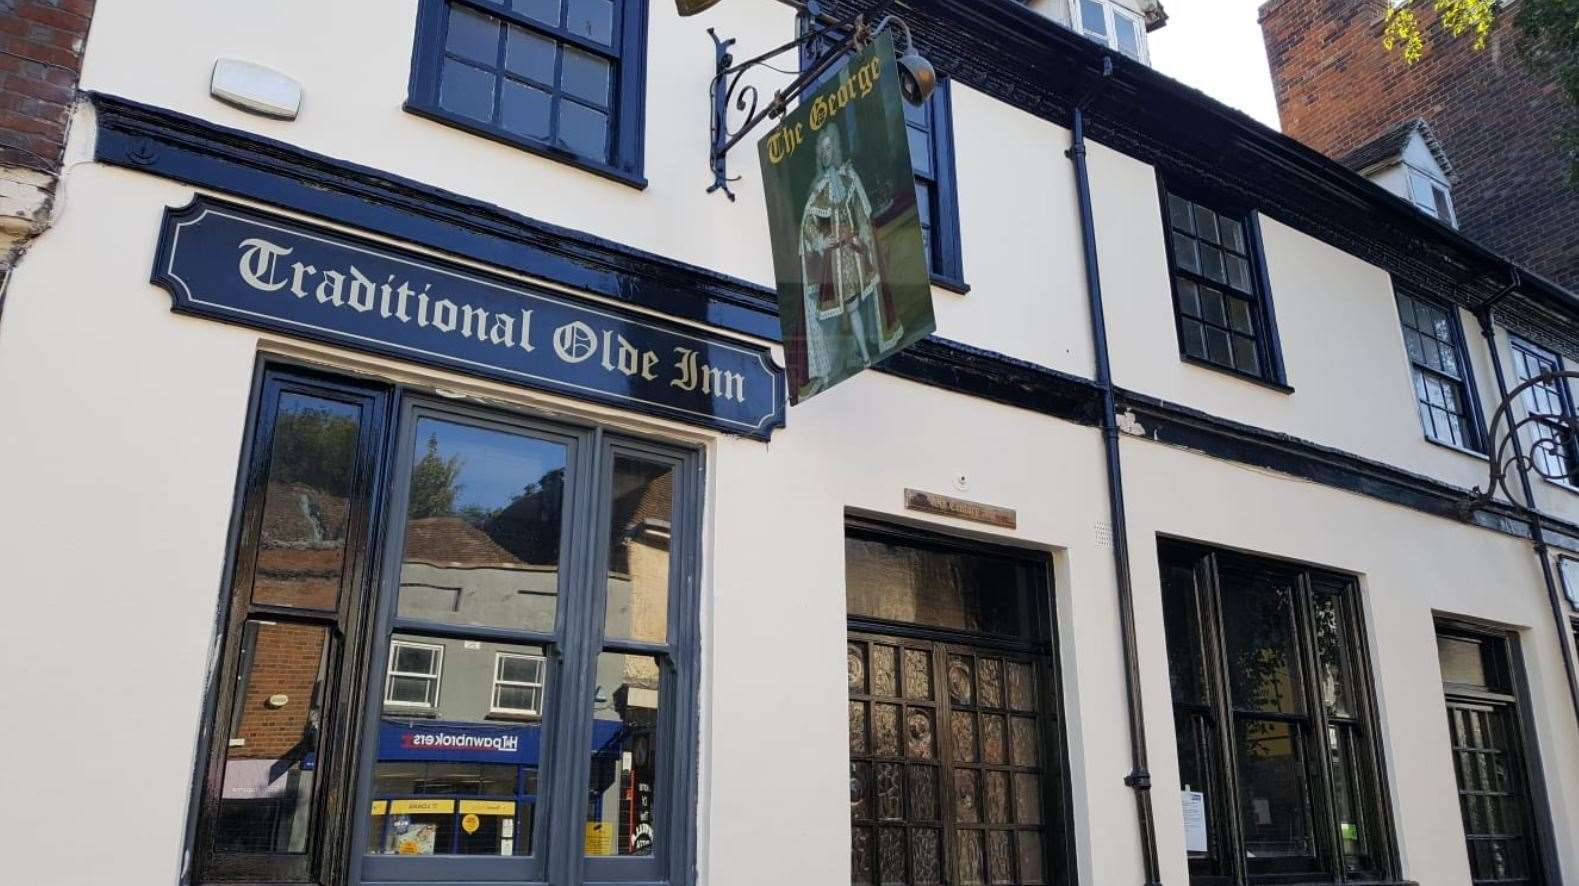 The George pub in Sittingbourne High Street is undergoing a £50k revamp